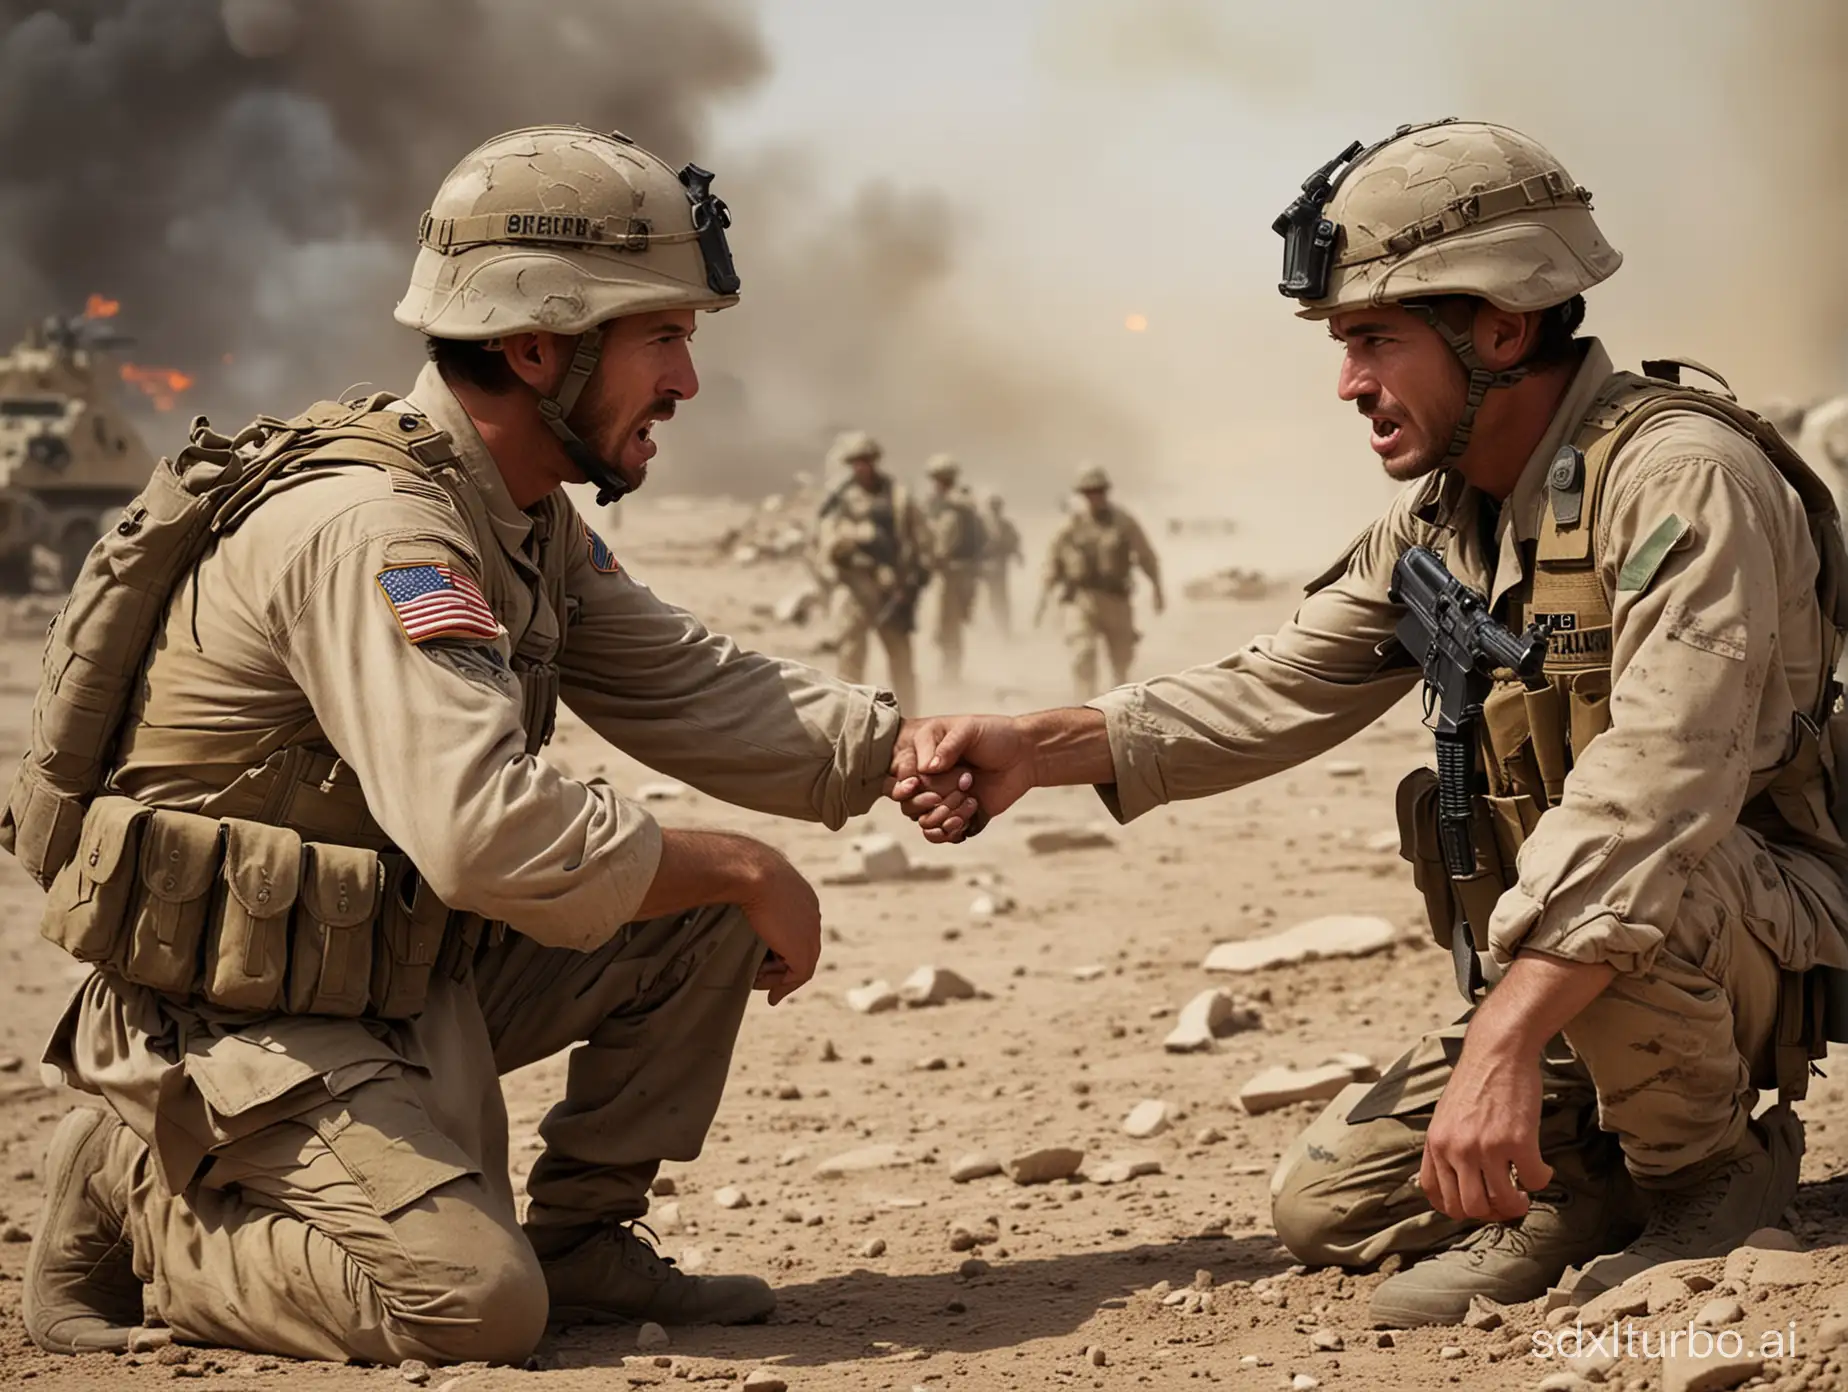 I want a picture expressing conflict resolution in wars.